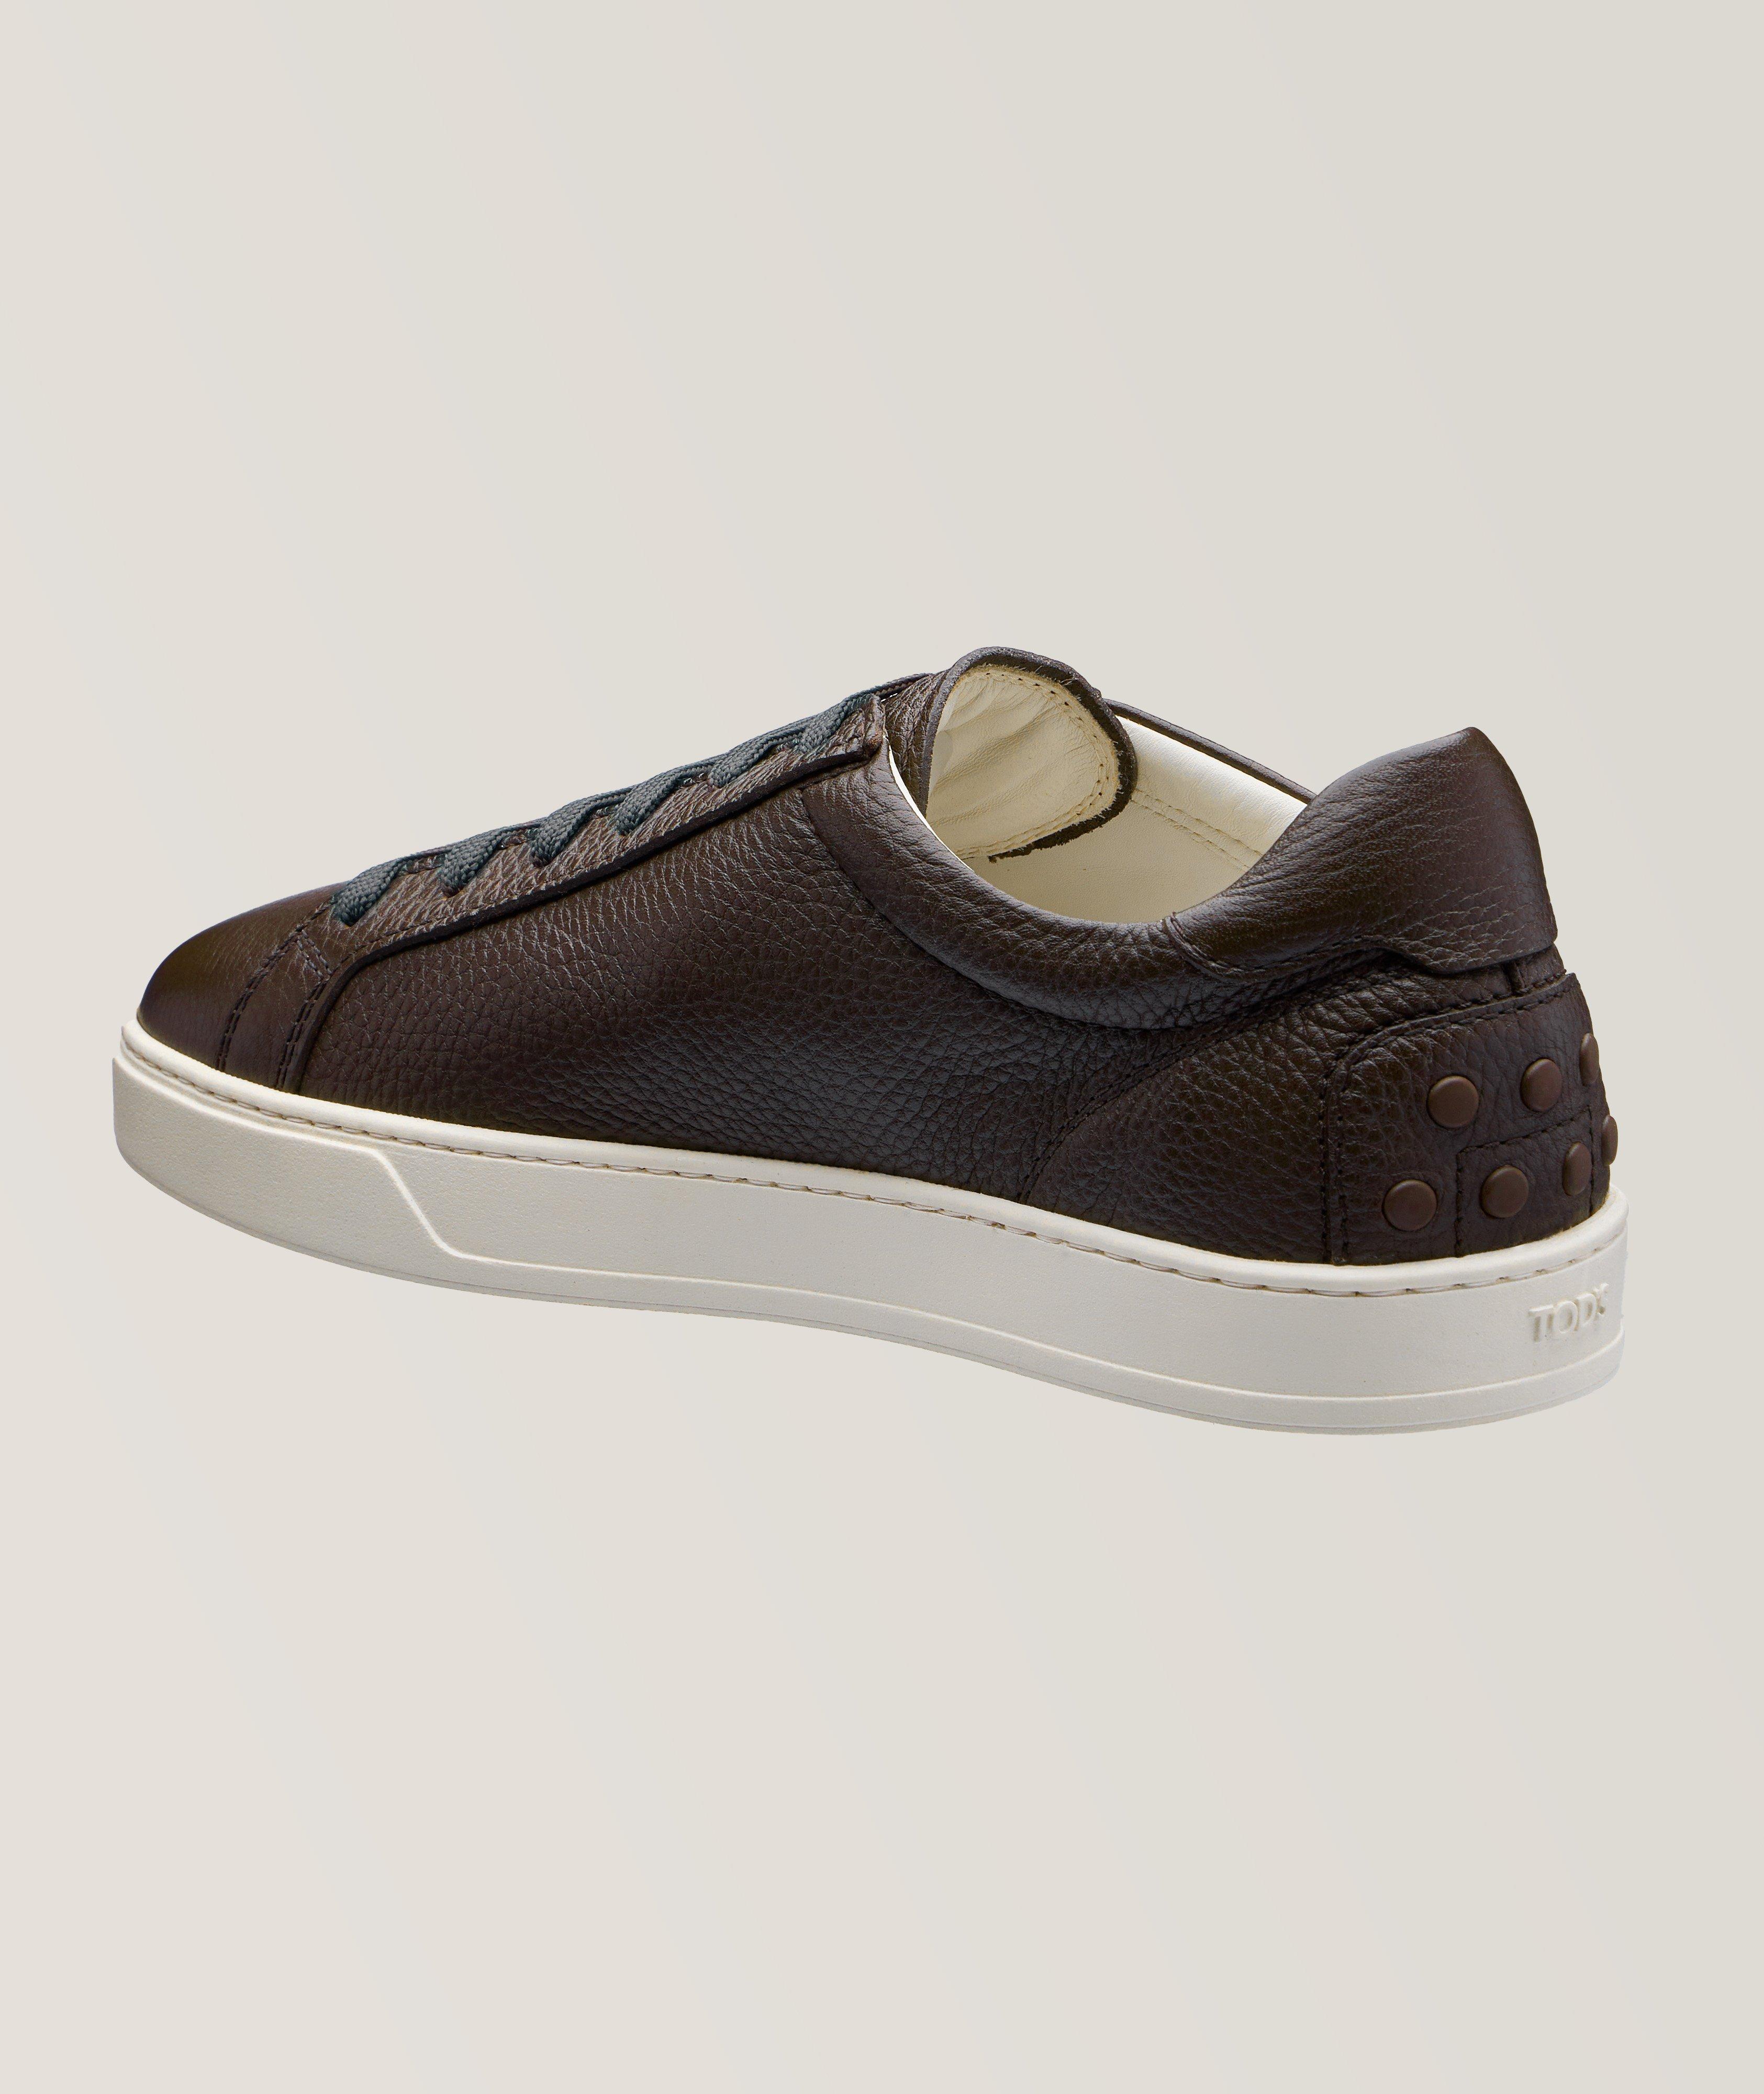 Low-Top Leather Sneaker image 1